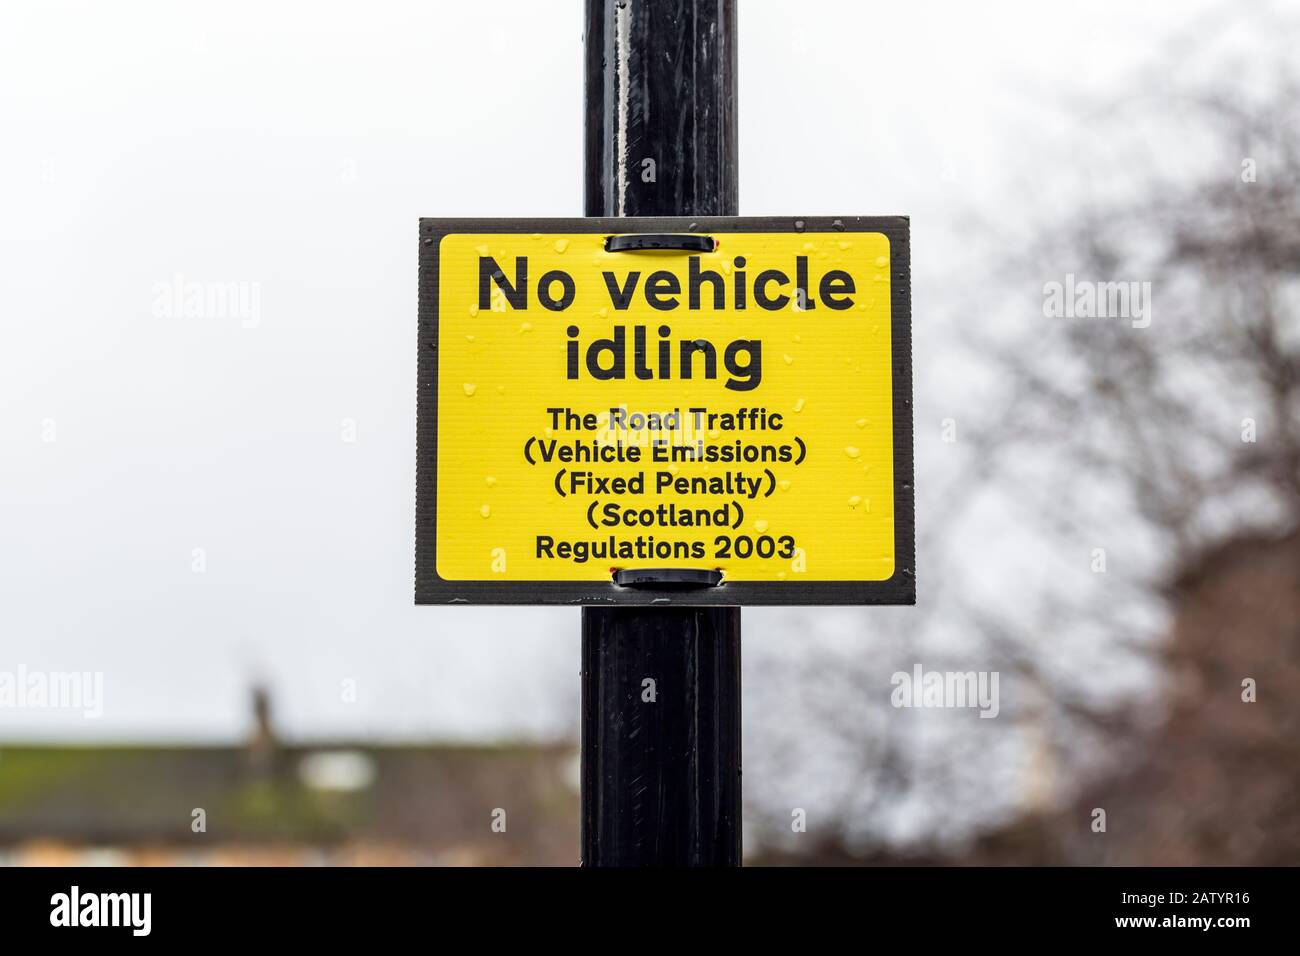 A No Vehicle Idling sign in Glasgow city centre, Scotland, UK Stock Photo